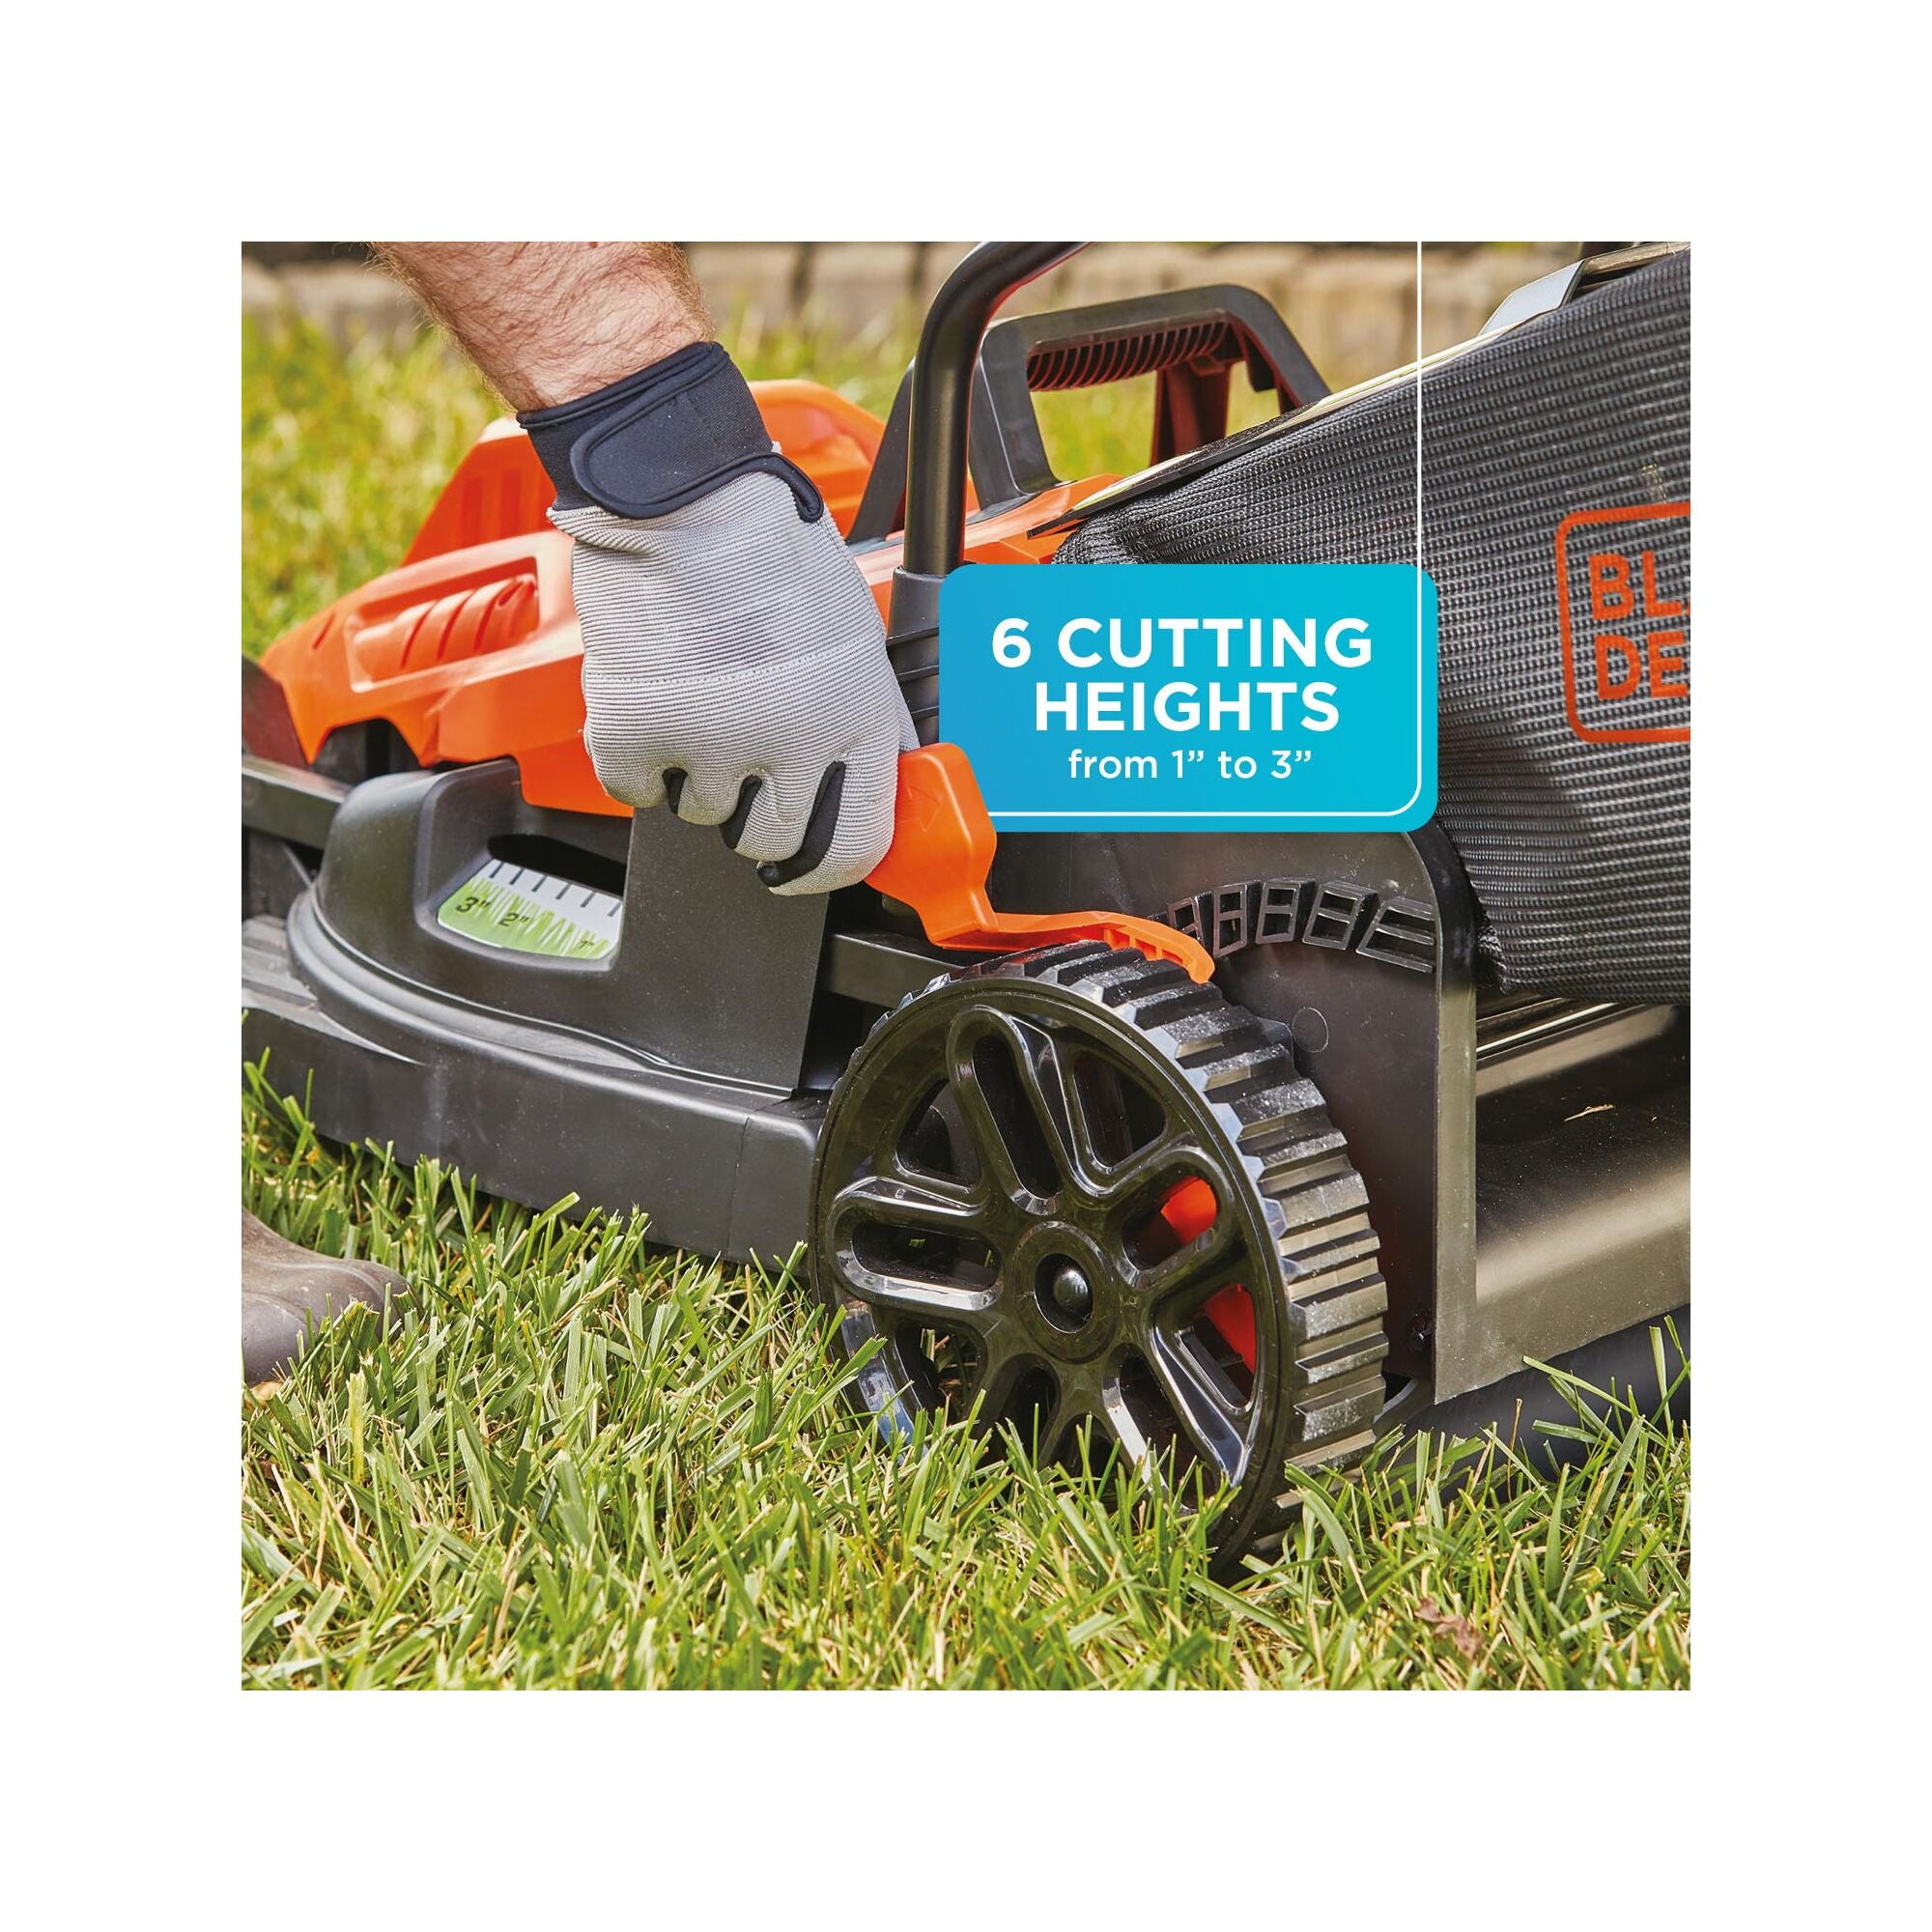 Innovations in Corded Outdoor Equipment from BLACK+DECKER™